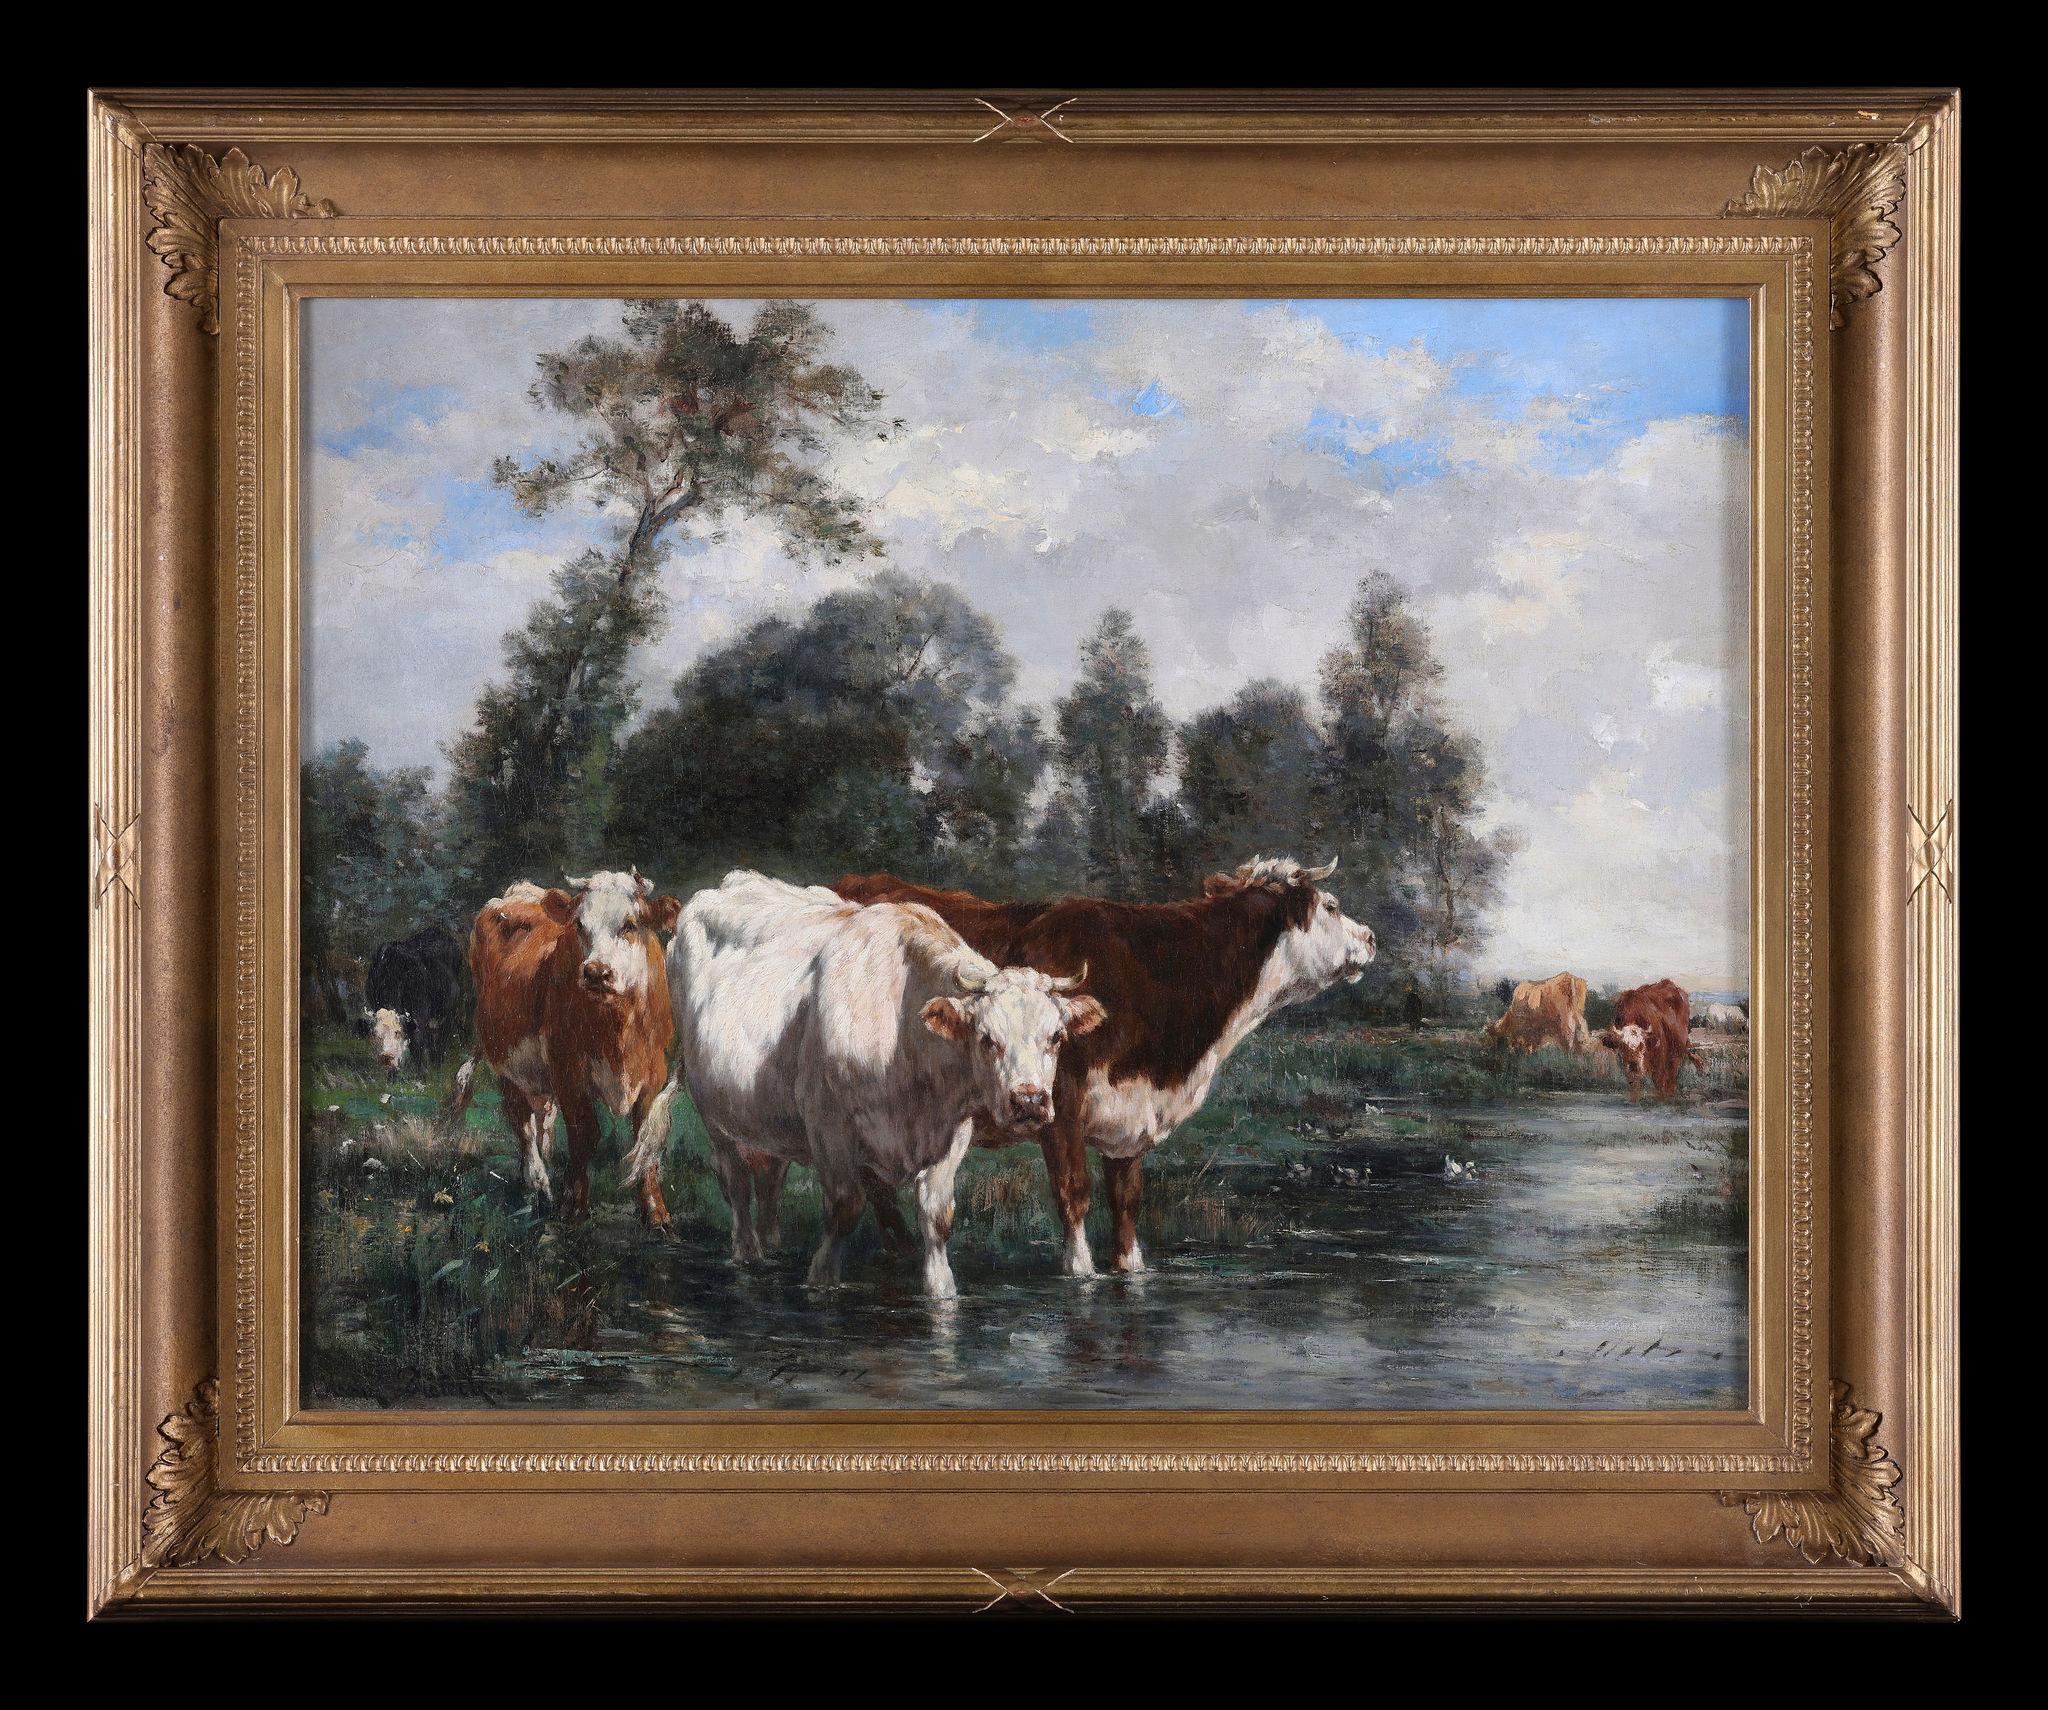 Marie Dieterle Animal Painting - Cattle by a River. Oil on Canvas